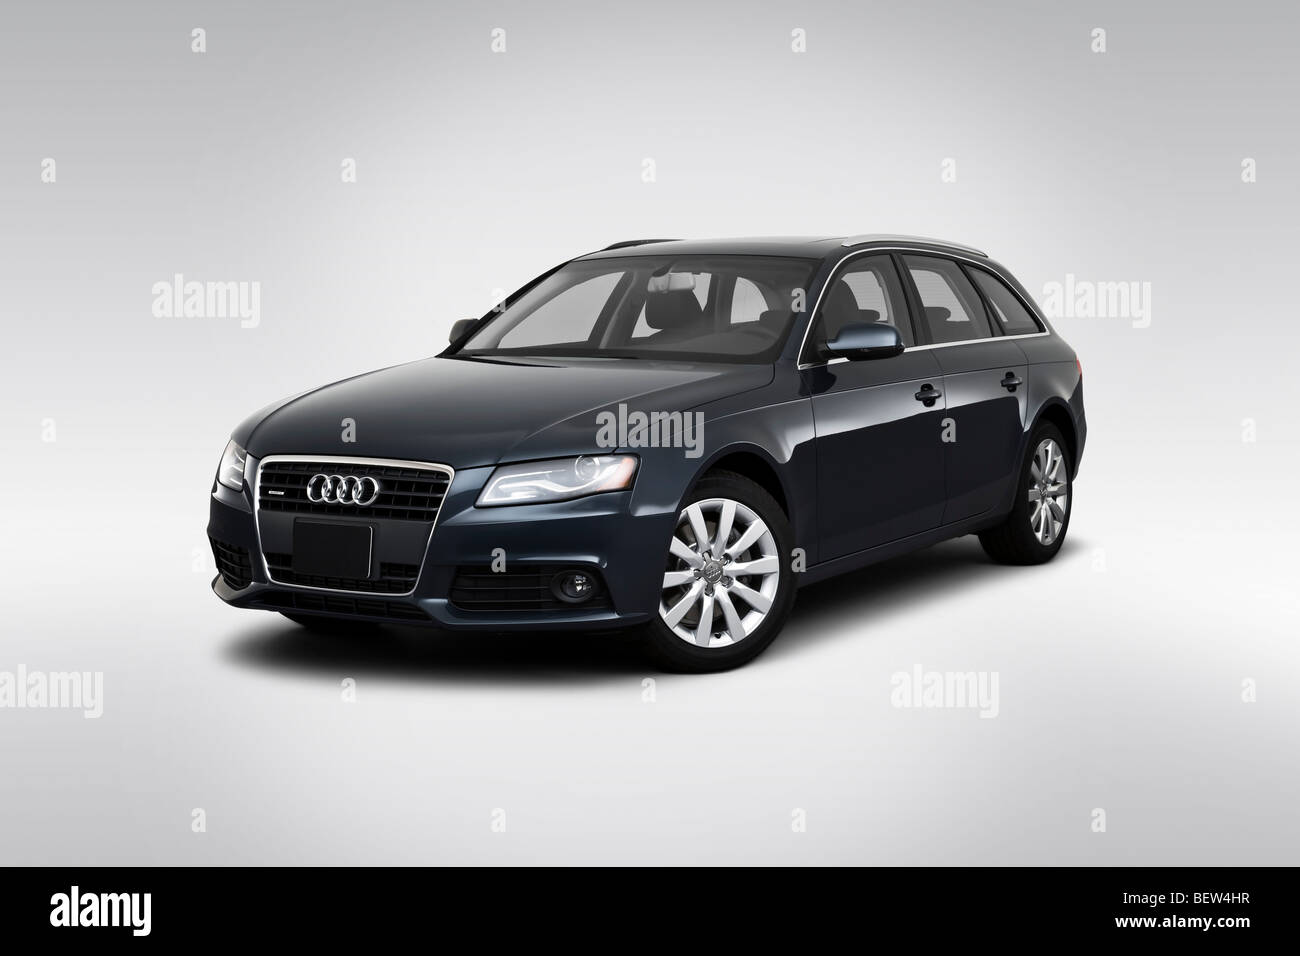 2010 Audi A4 Avant 2.0T quattro in Gray - Front angle view Stock Photo